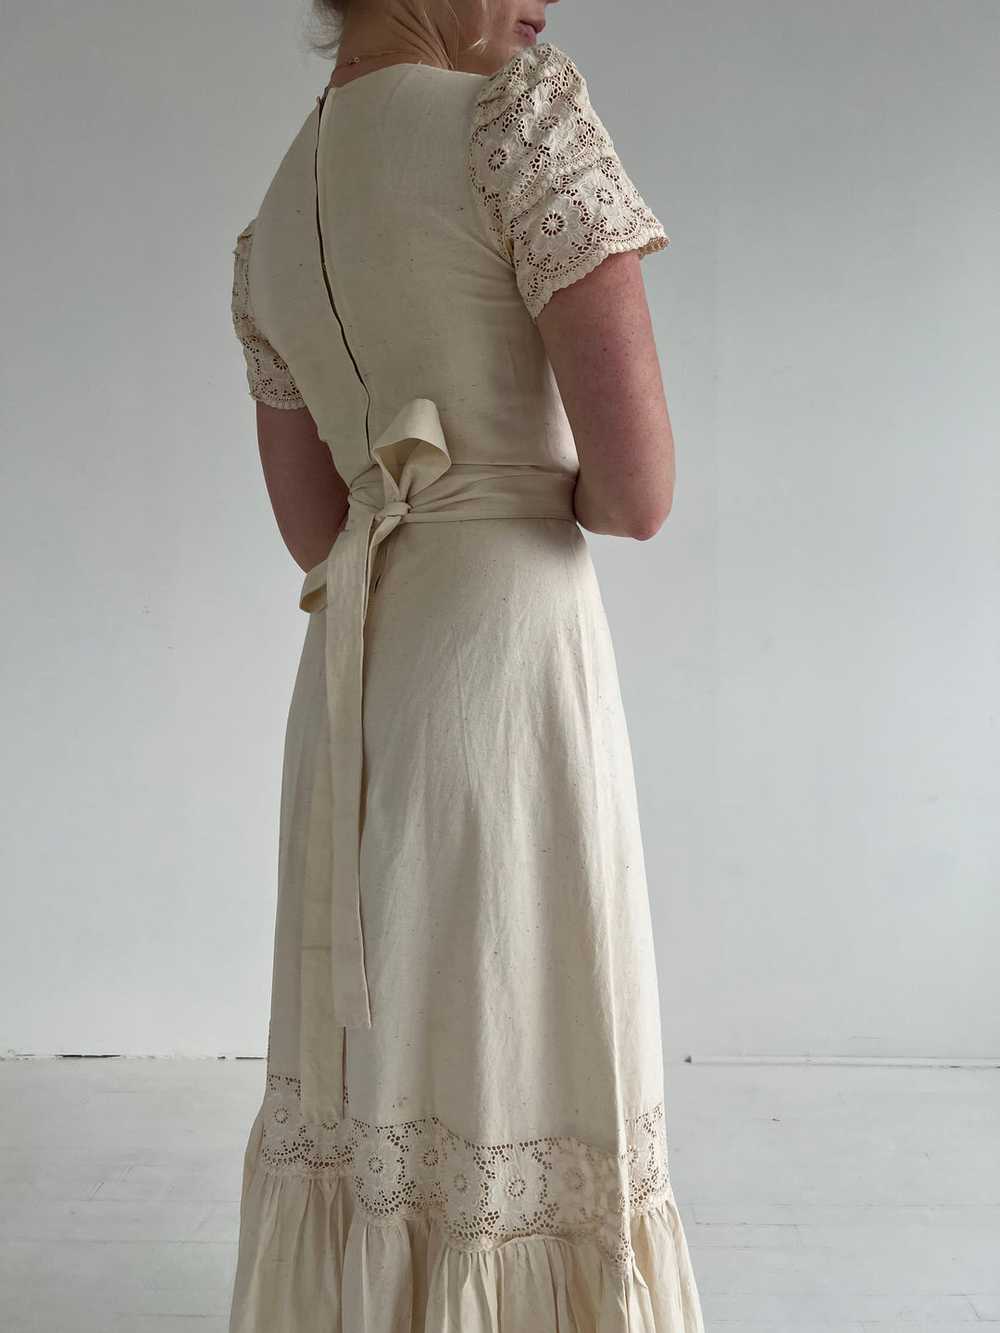 1970's Cotton Dress with Eyelet - image 5